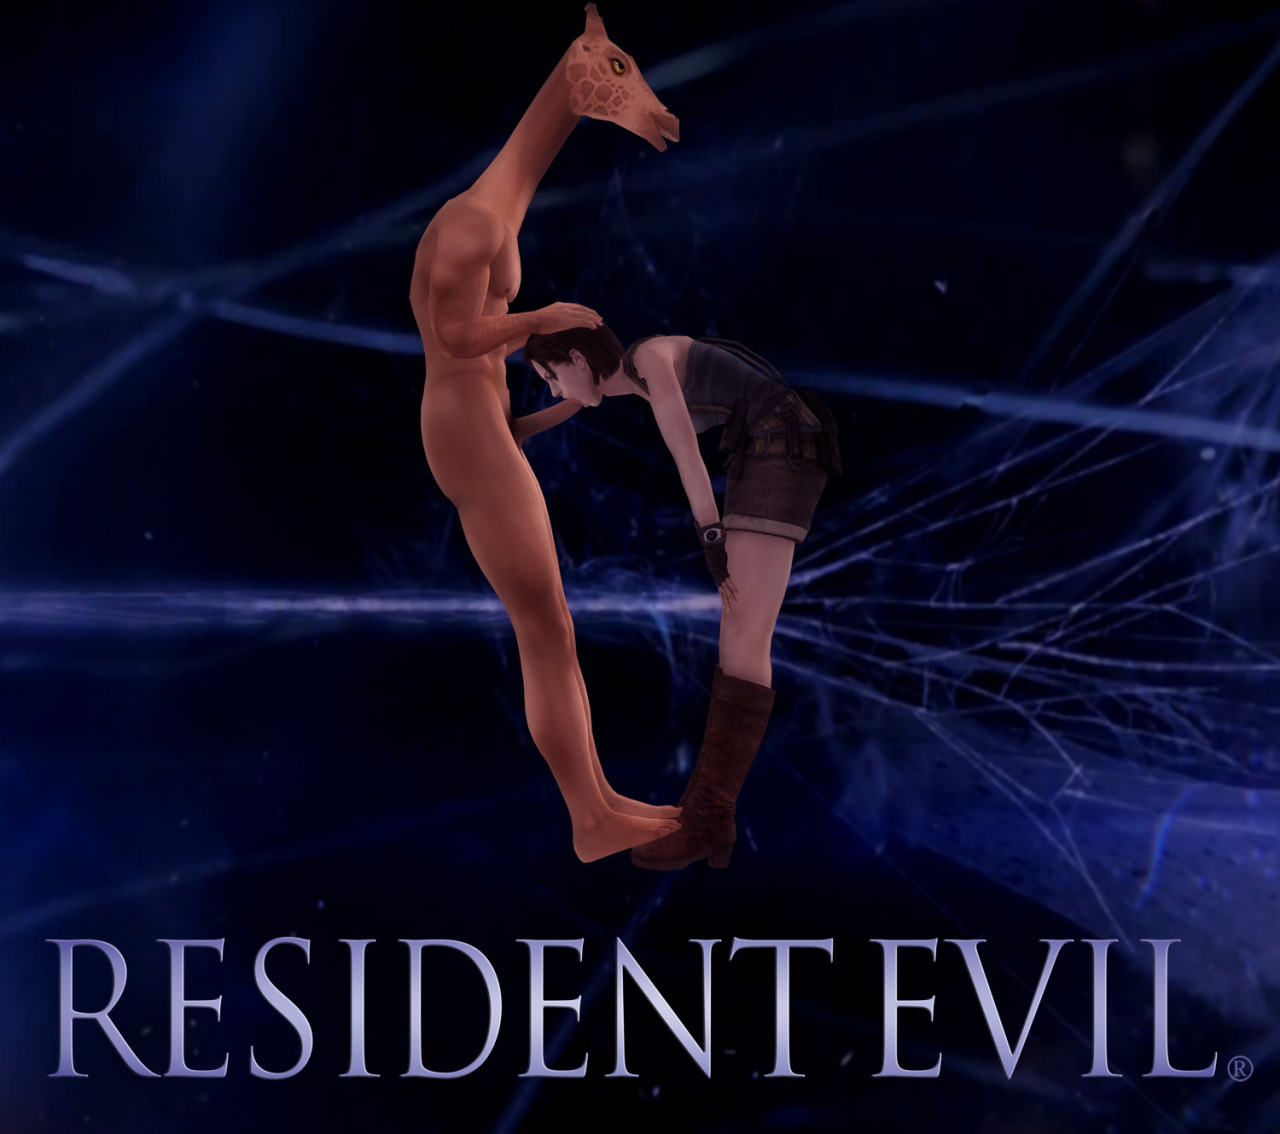 delicious-hentai:  Resident Evil 6  Huh. I guess it does look like a lady sucking